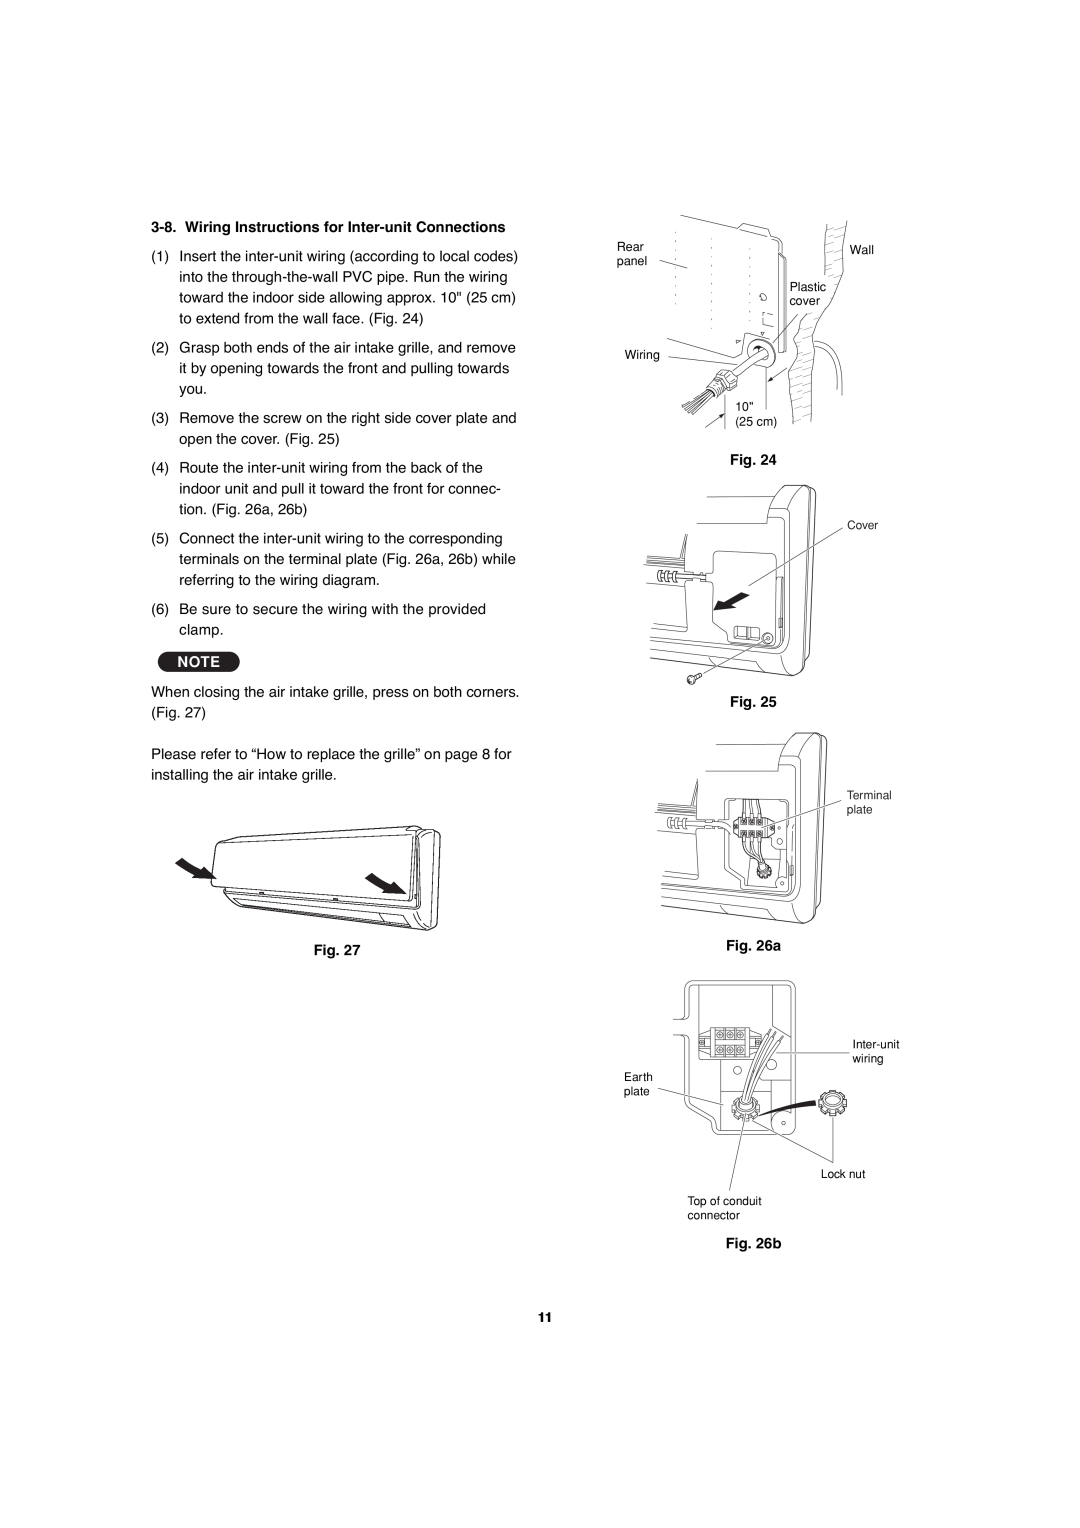 Sanyo CH1271 Wiring Instructions for Inter-unitConnections, b, Rear, Wall, panel, Plastic cover Wiring 10 25 cm, Cover 